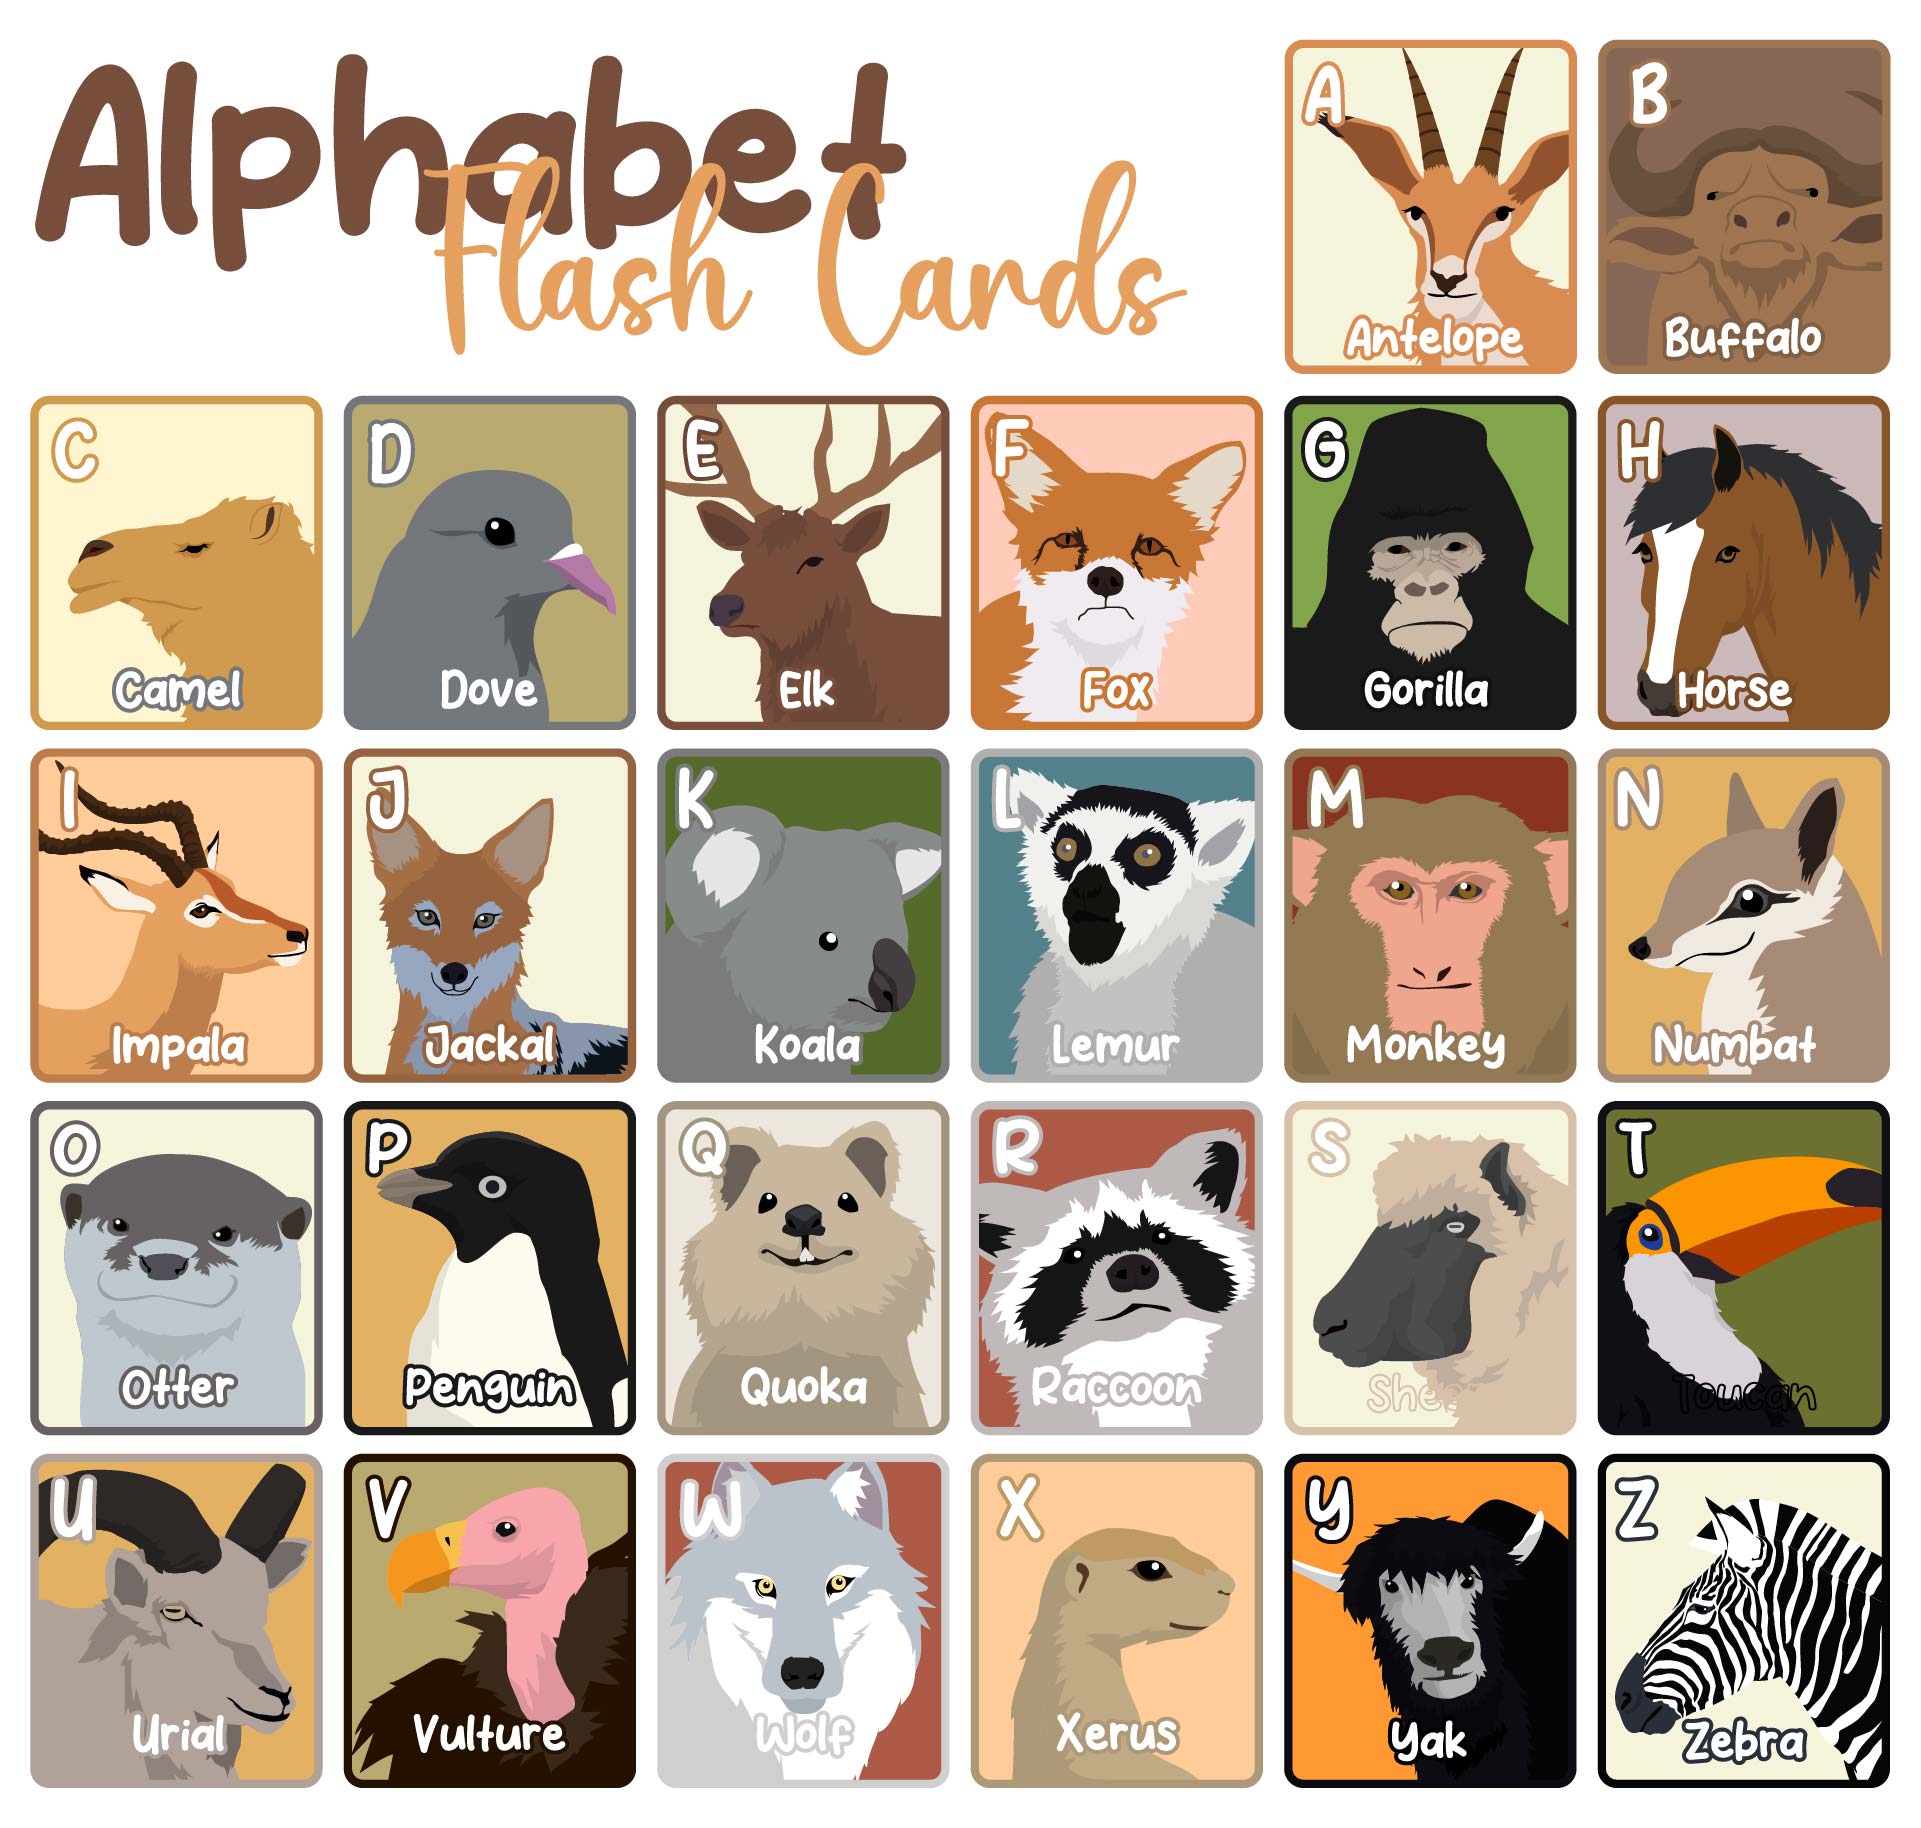 7-best-images-of-free-printable-alphabet-letter-cards-free-printable